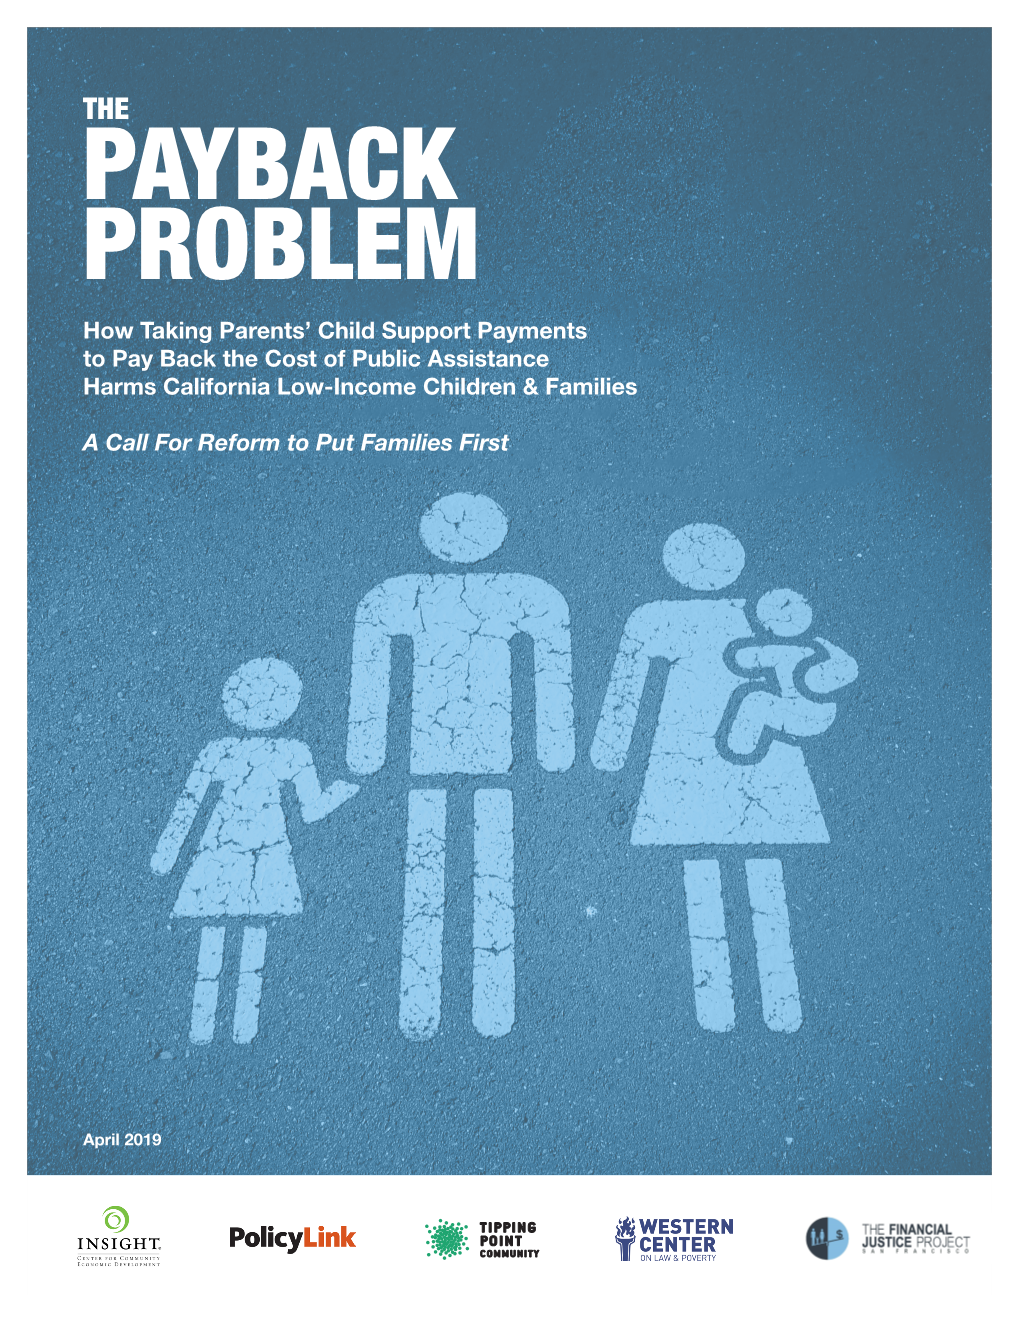 THE PAYBACK PROBLEM How Taking Parents’ Child Support Payments to Pay Back the Cost of Public Assistance Harms California Low-Income Children & Families